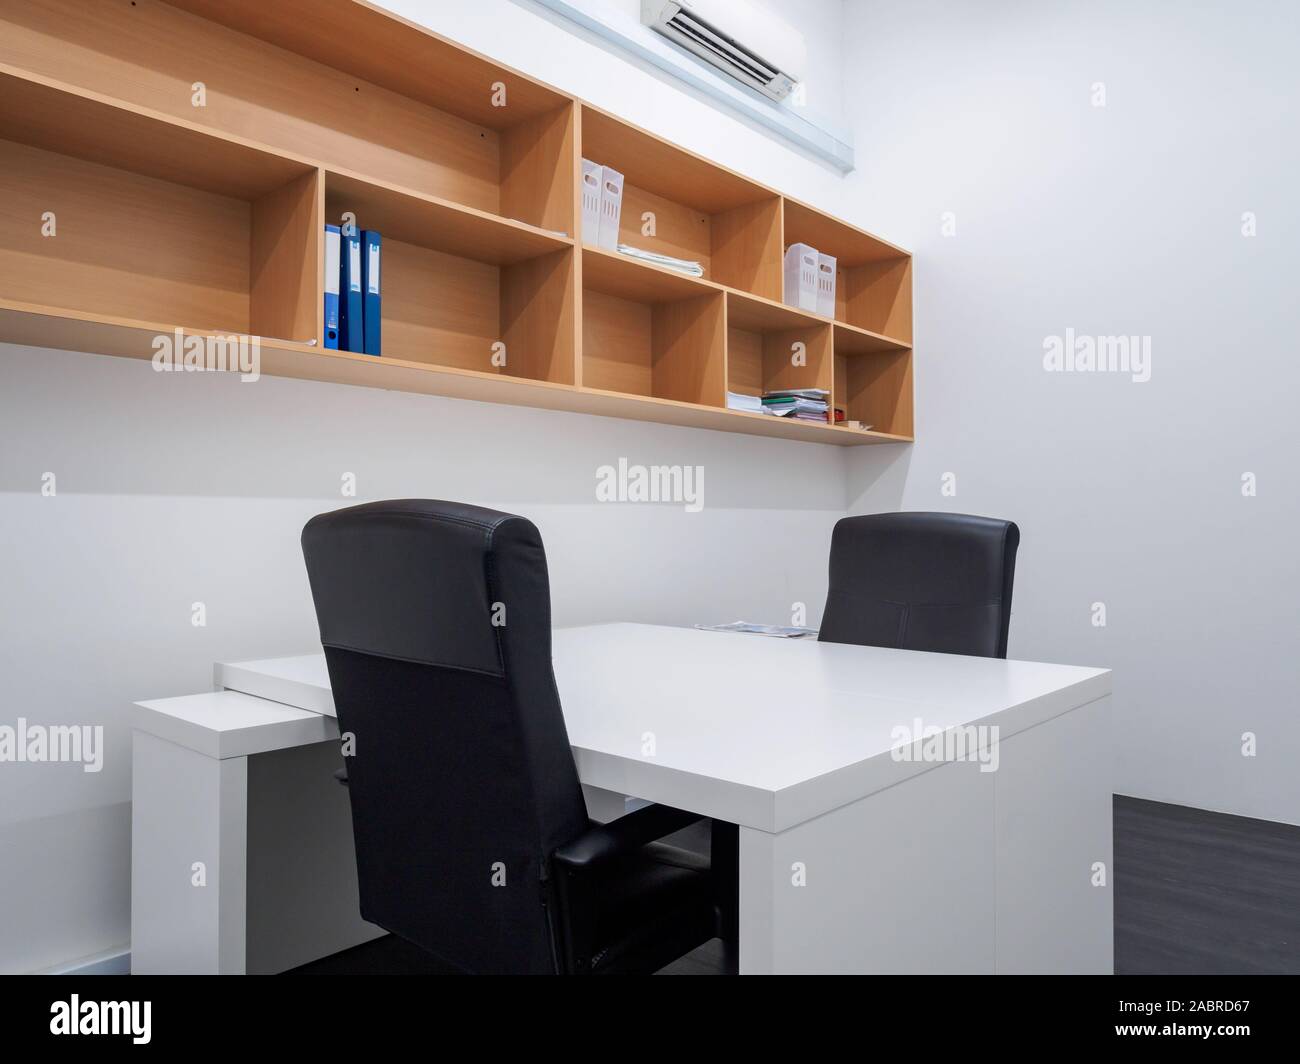 Simple Small Office Interior With Black And White Layout Stock